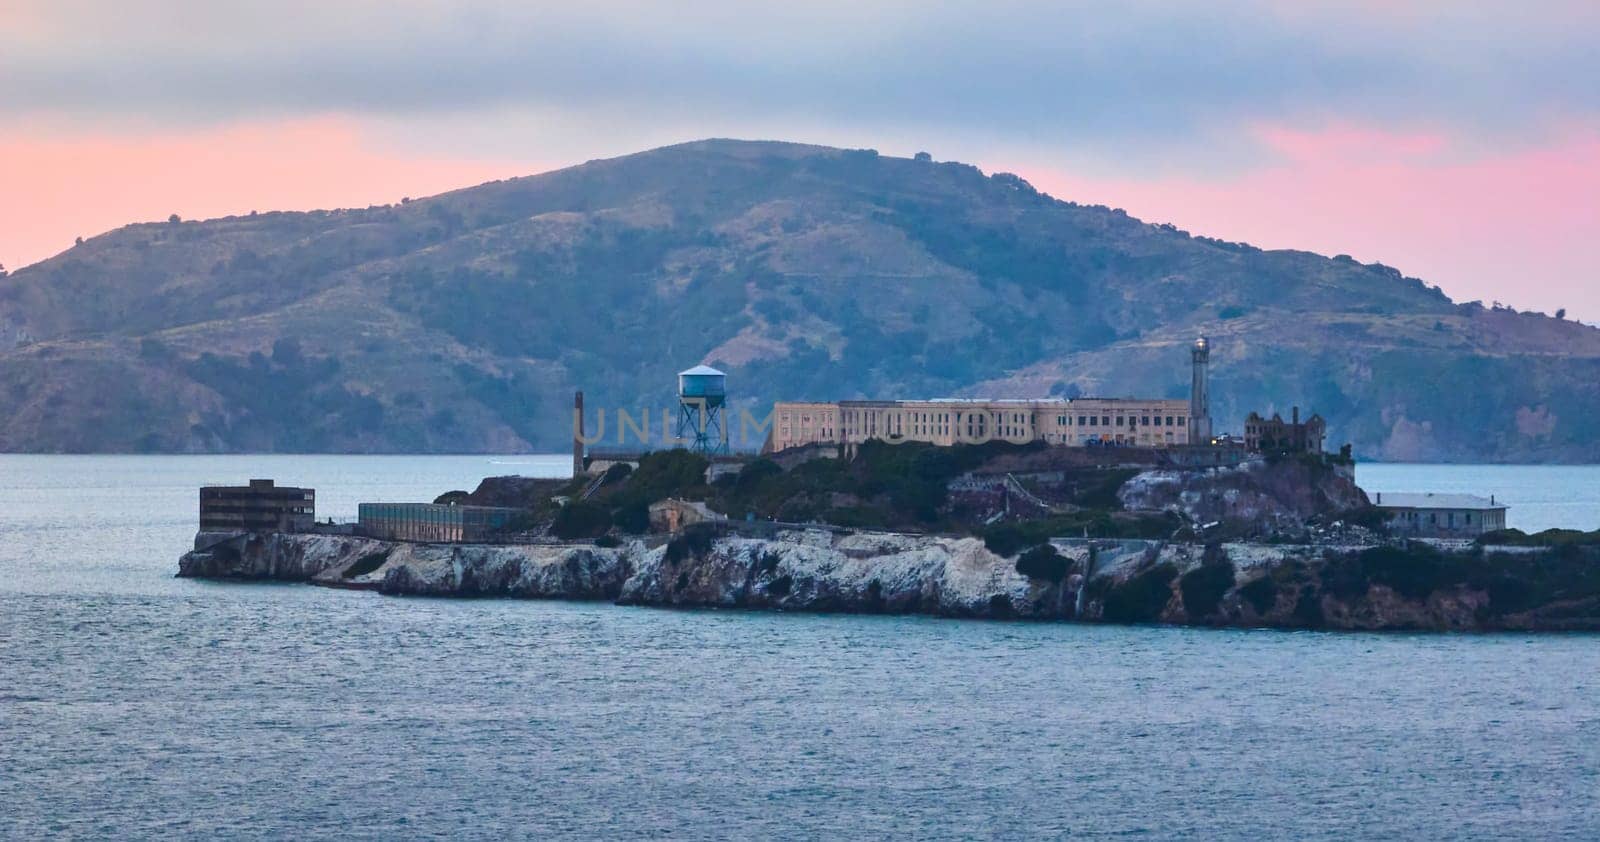 Image of Alcatraz Island with pink glow over island and distant mountain aerial